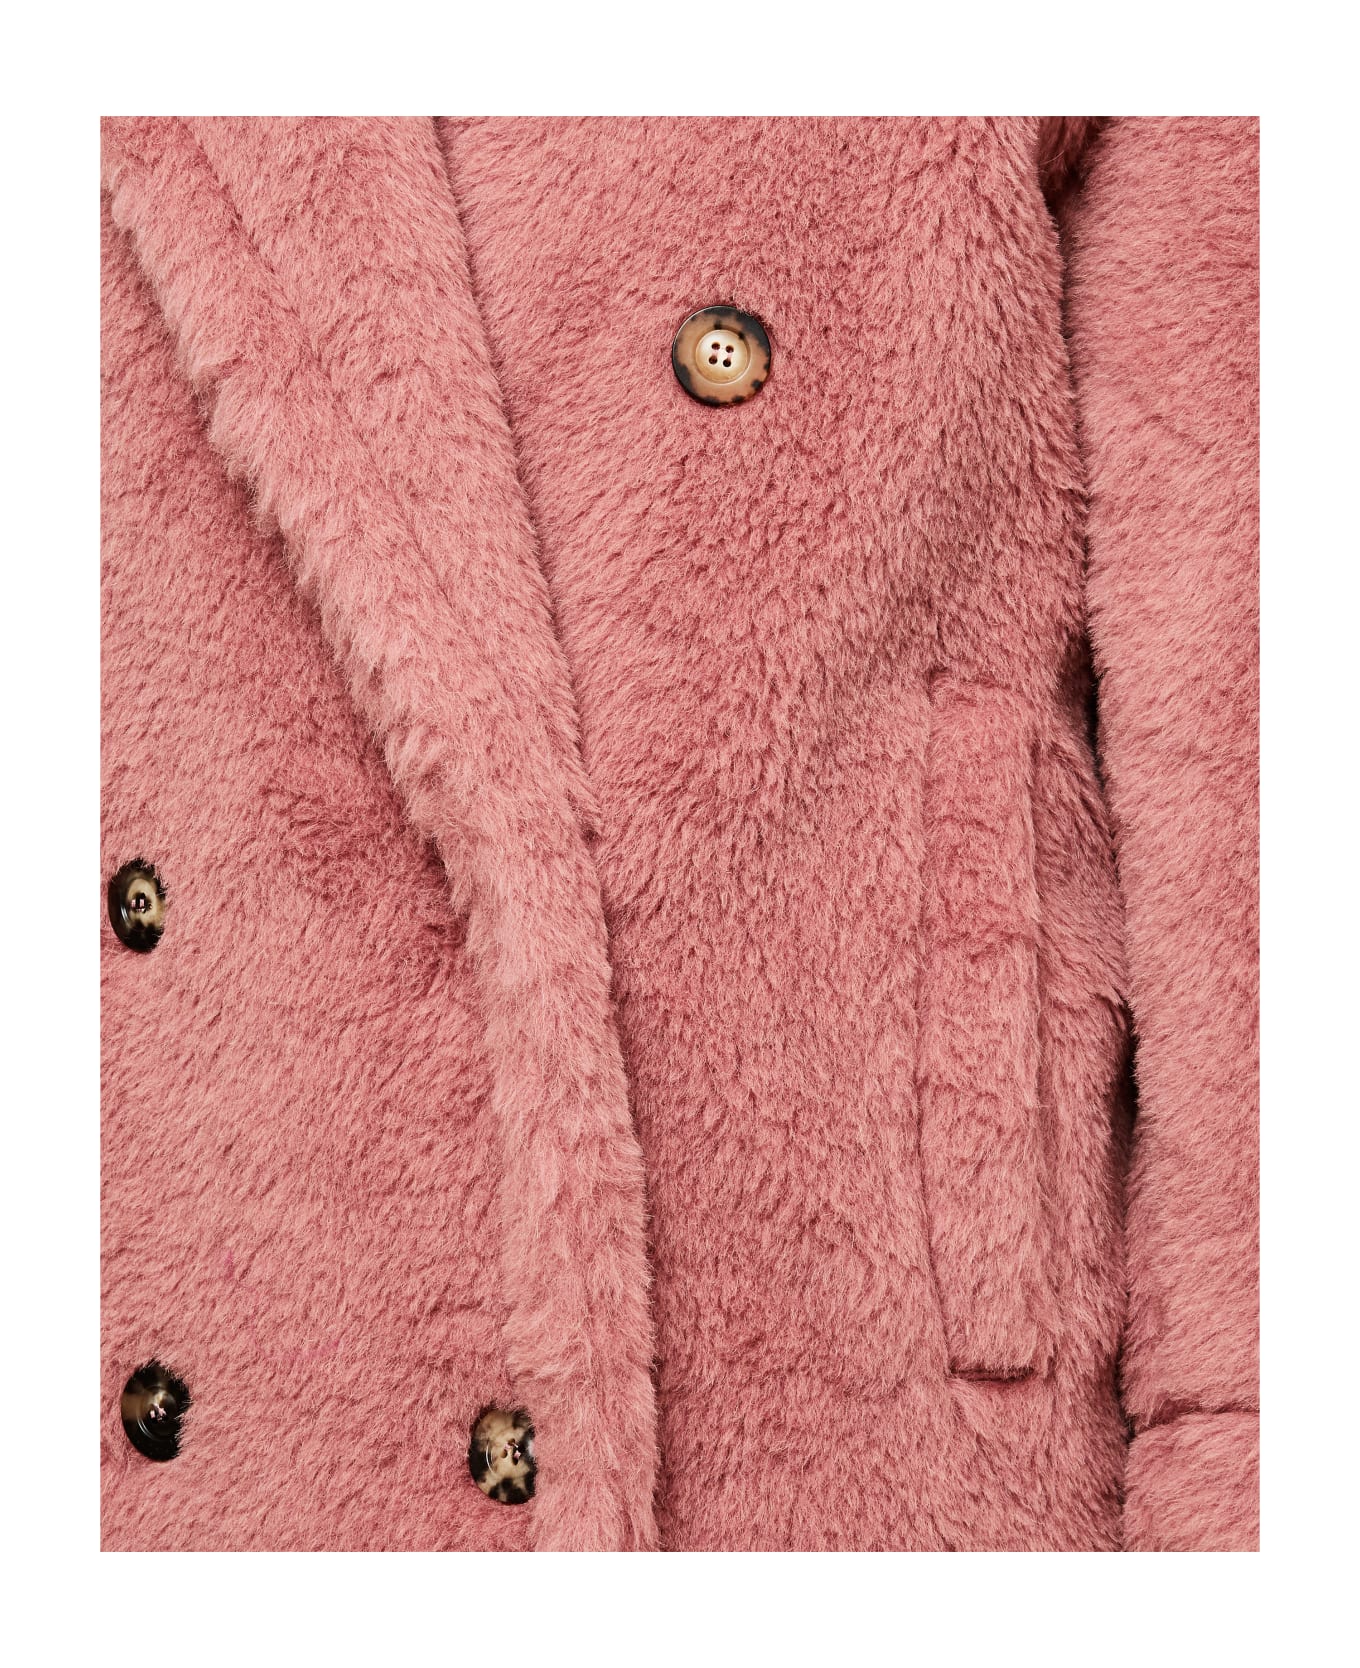 Max Mara Zitto Double-breasted Wool Coat - Antique Rose